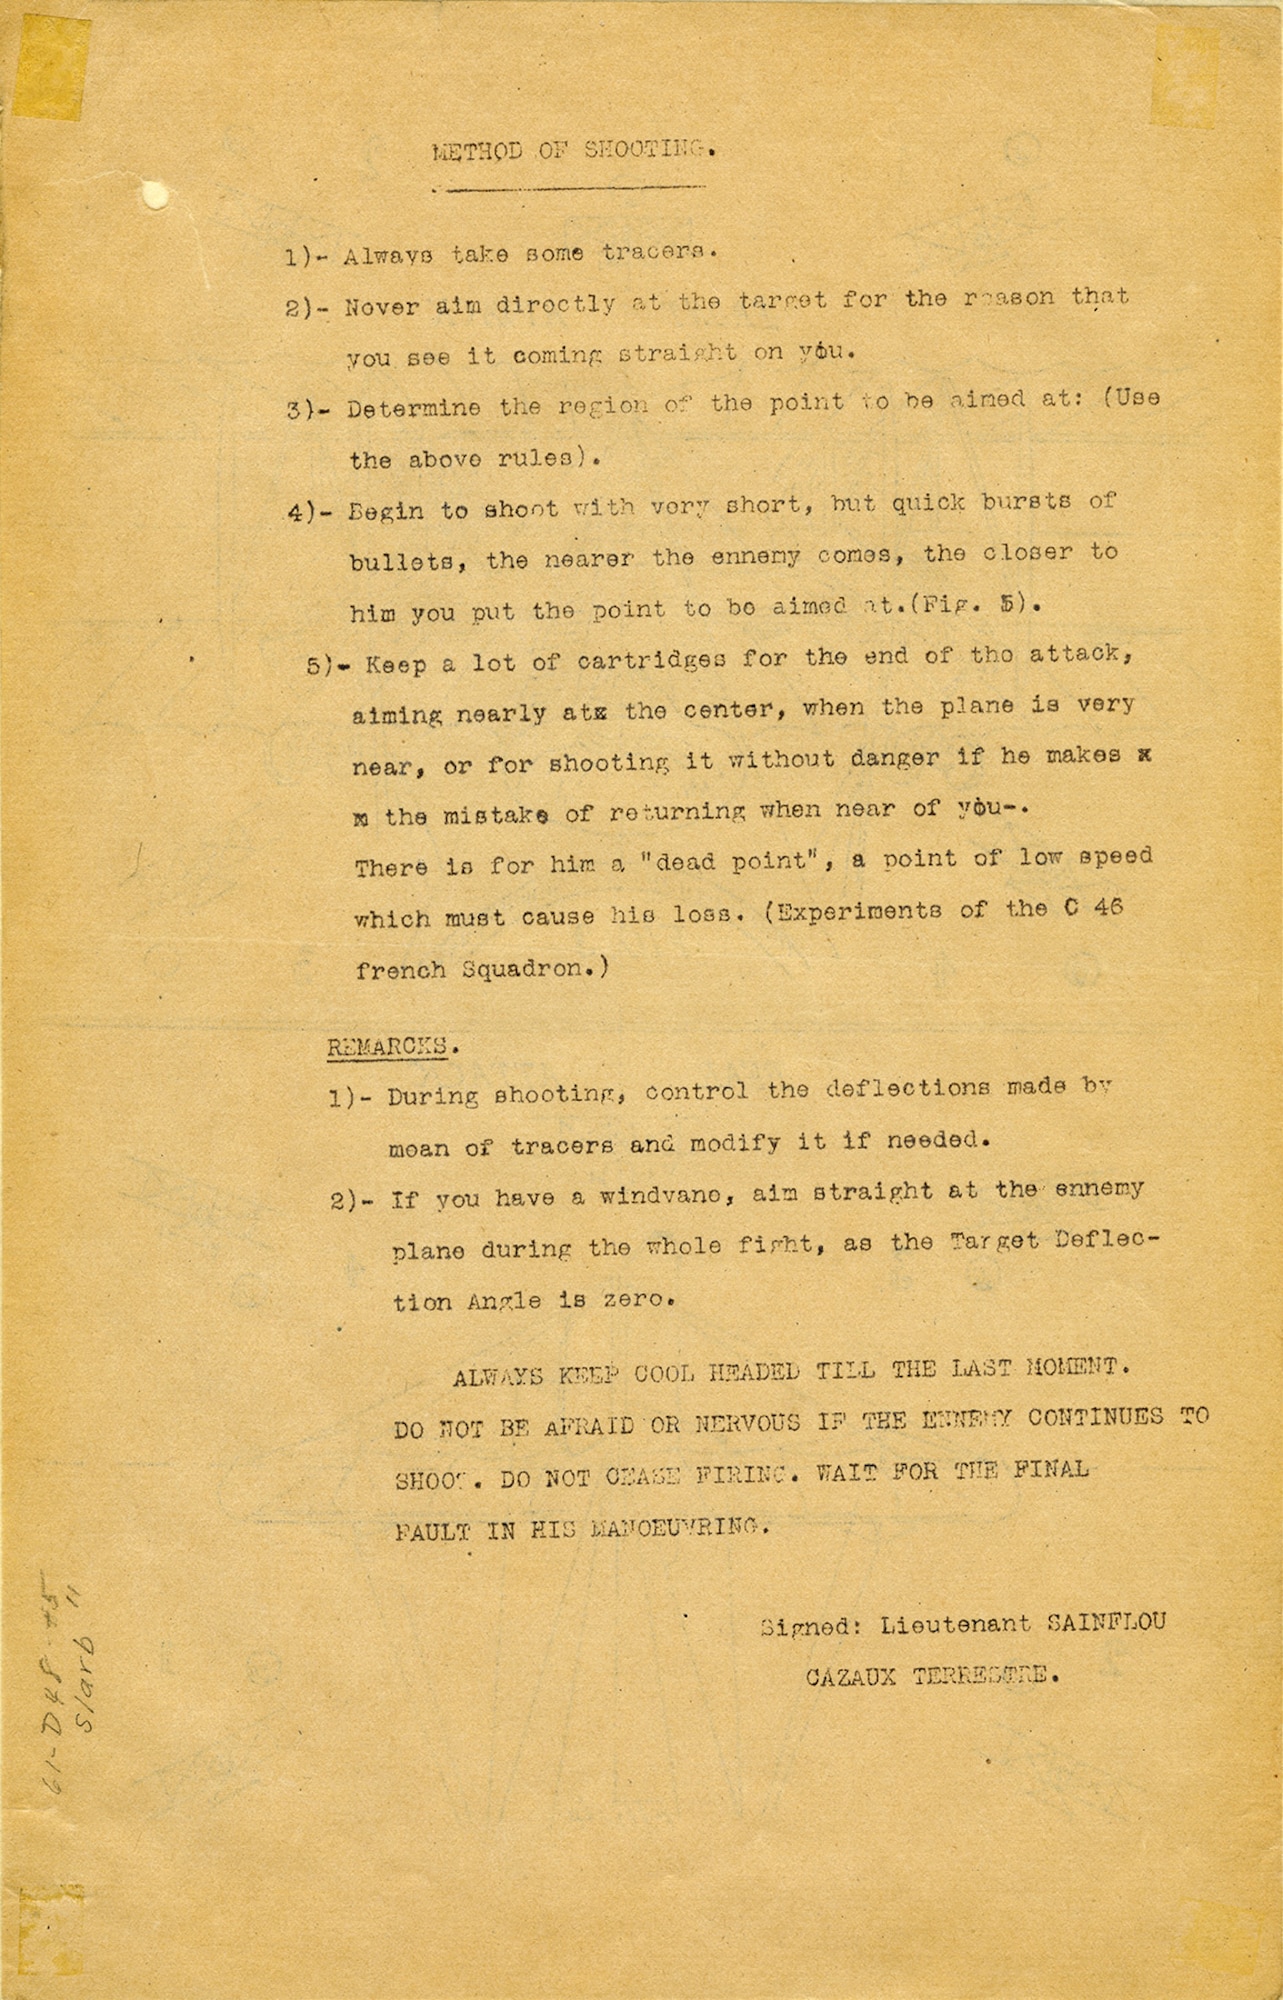 This newsletter, written for aircraft gunners and observers, describes the proper tactics of defensive shooting against enemy pursuit aircraft. These lessons were part of the core training received by American observers in France during World War I. This newsletter returned home with Lt. Harry F. Slarb, an observer with 9th Aero Squadron. (U.S. Air Force photo)